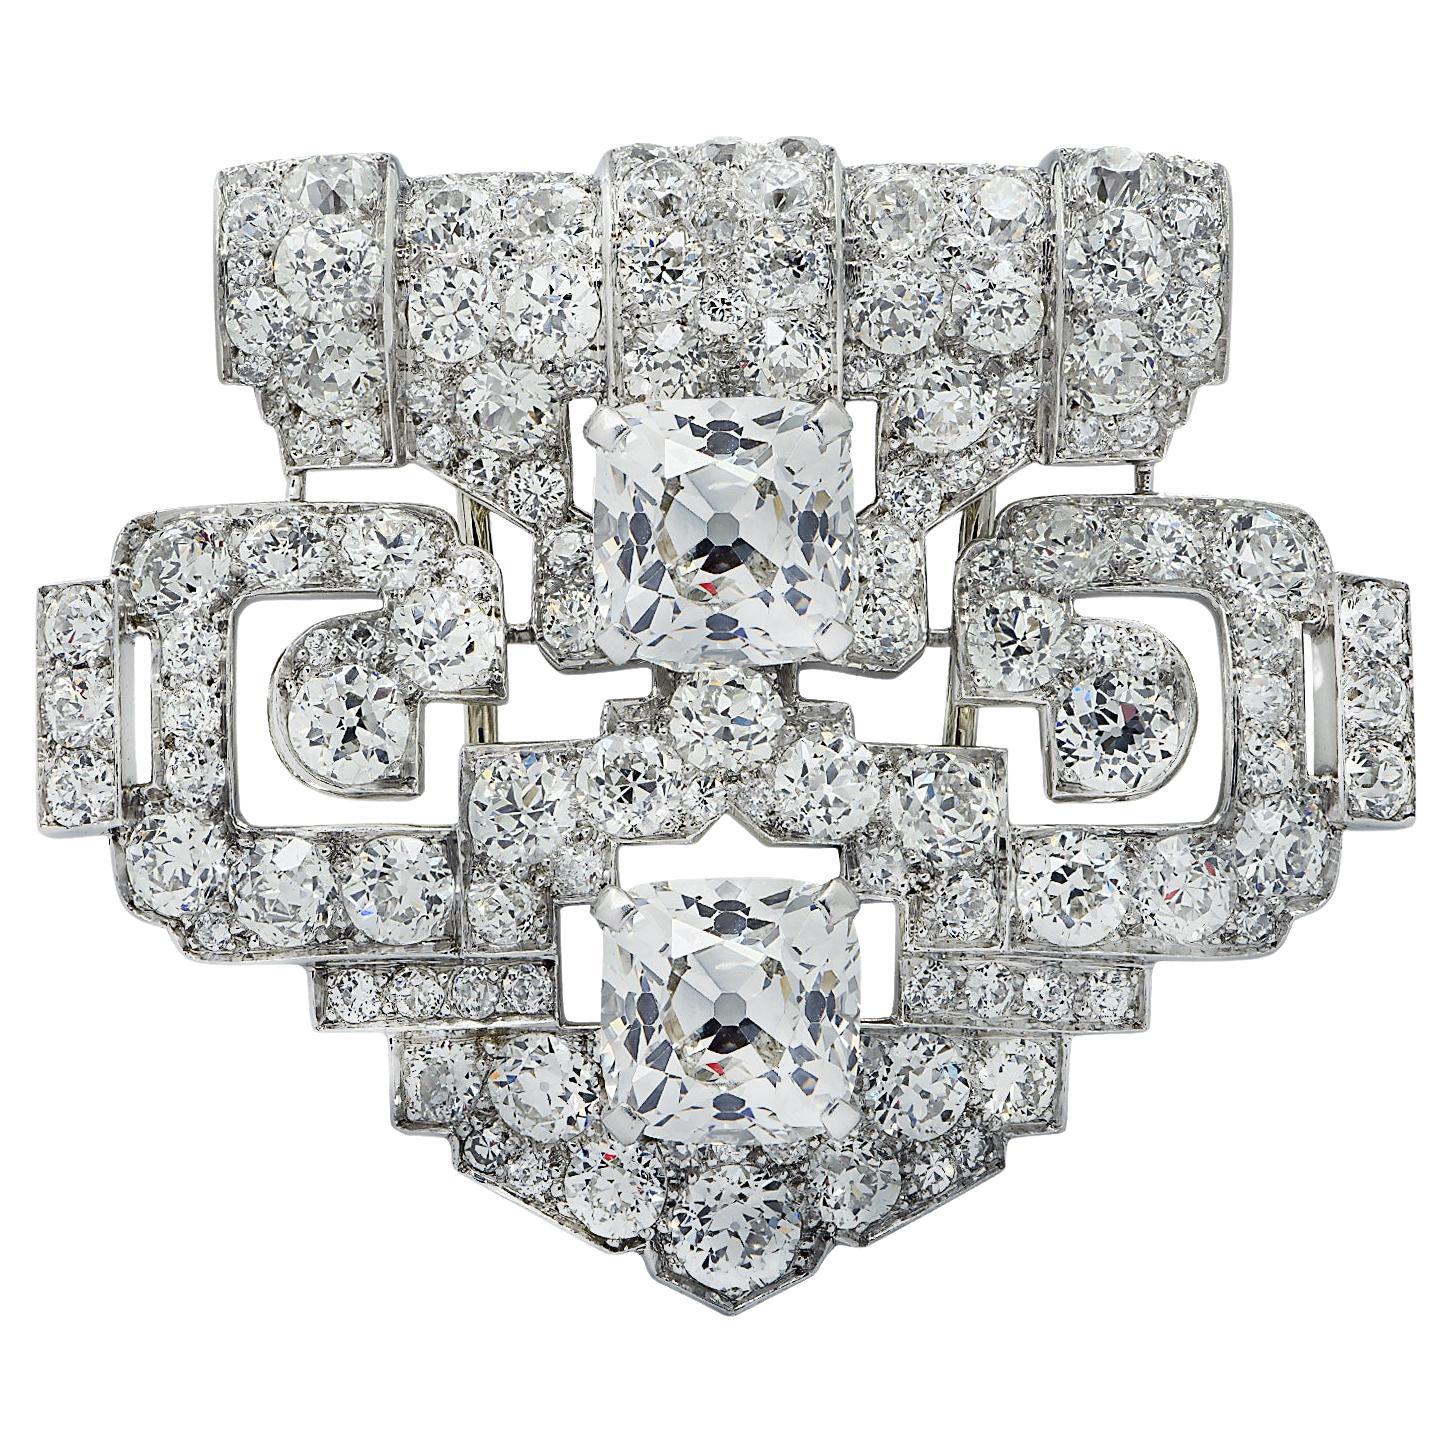 Cartier New York GIA Certified 11.24 Carat Old Mine Cushion Diamond Brooch For Sale